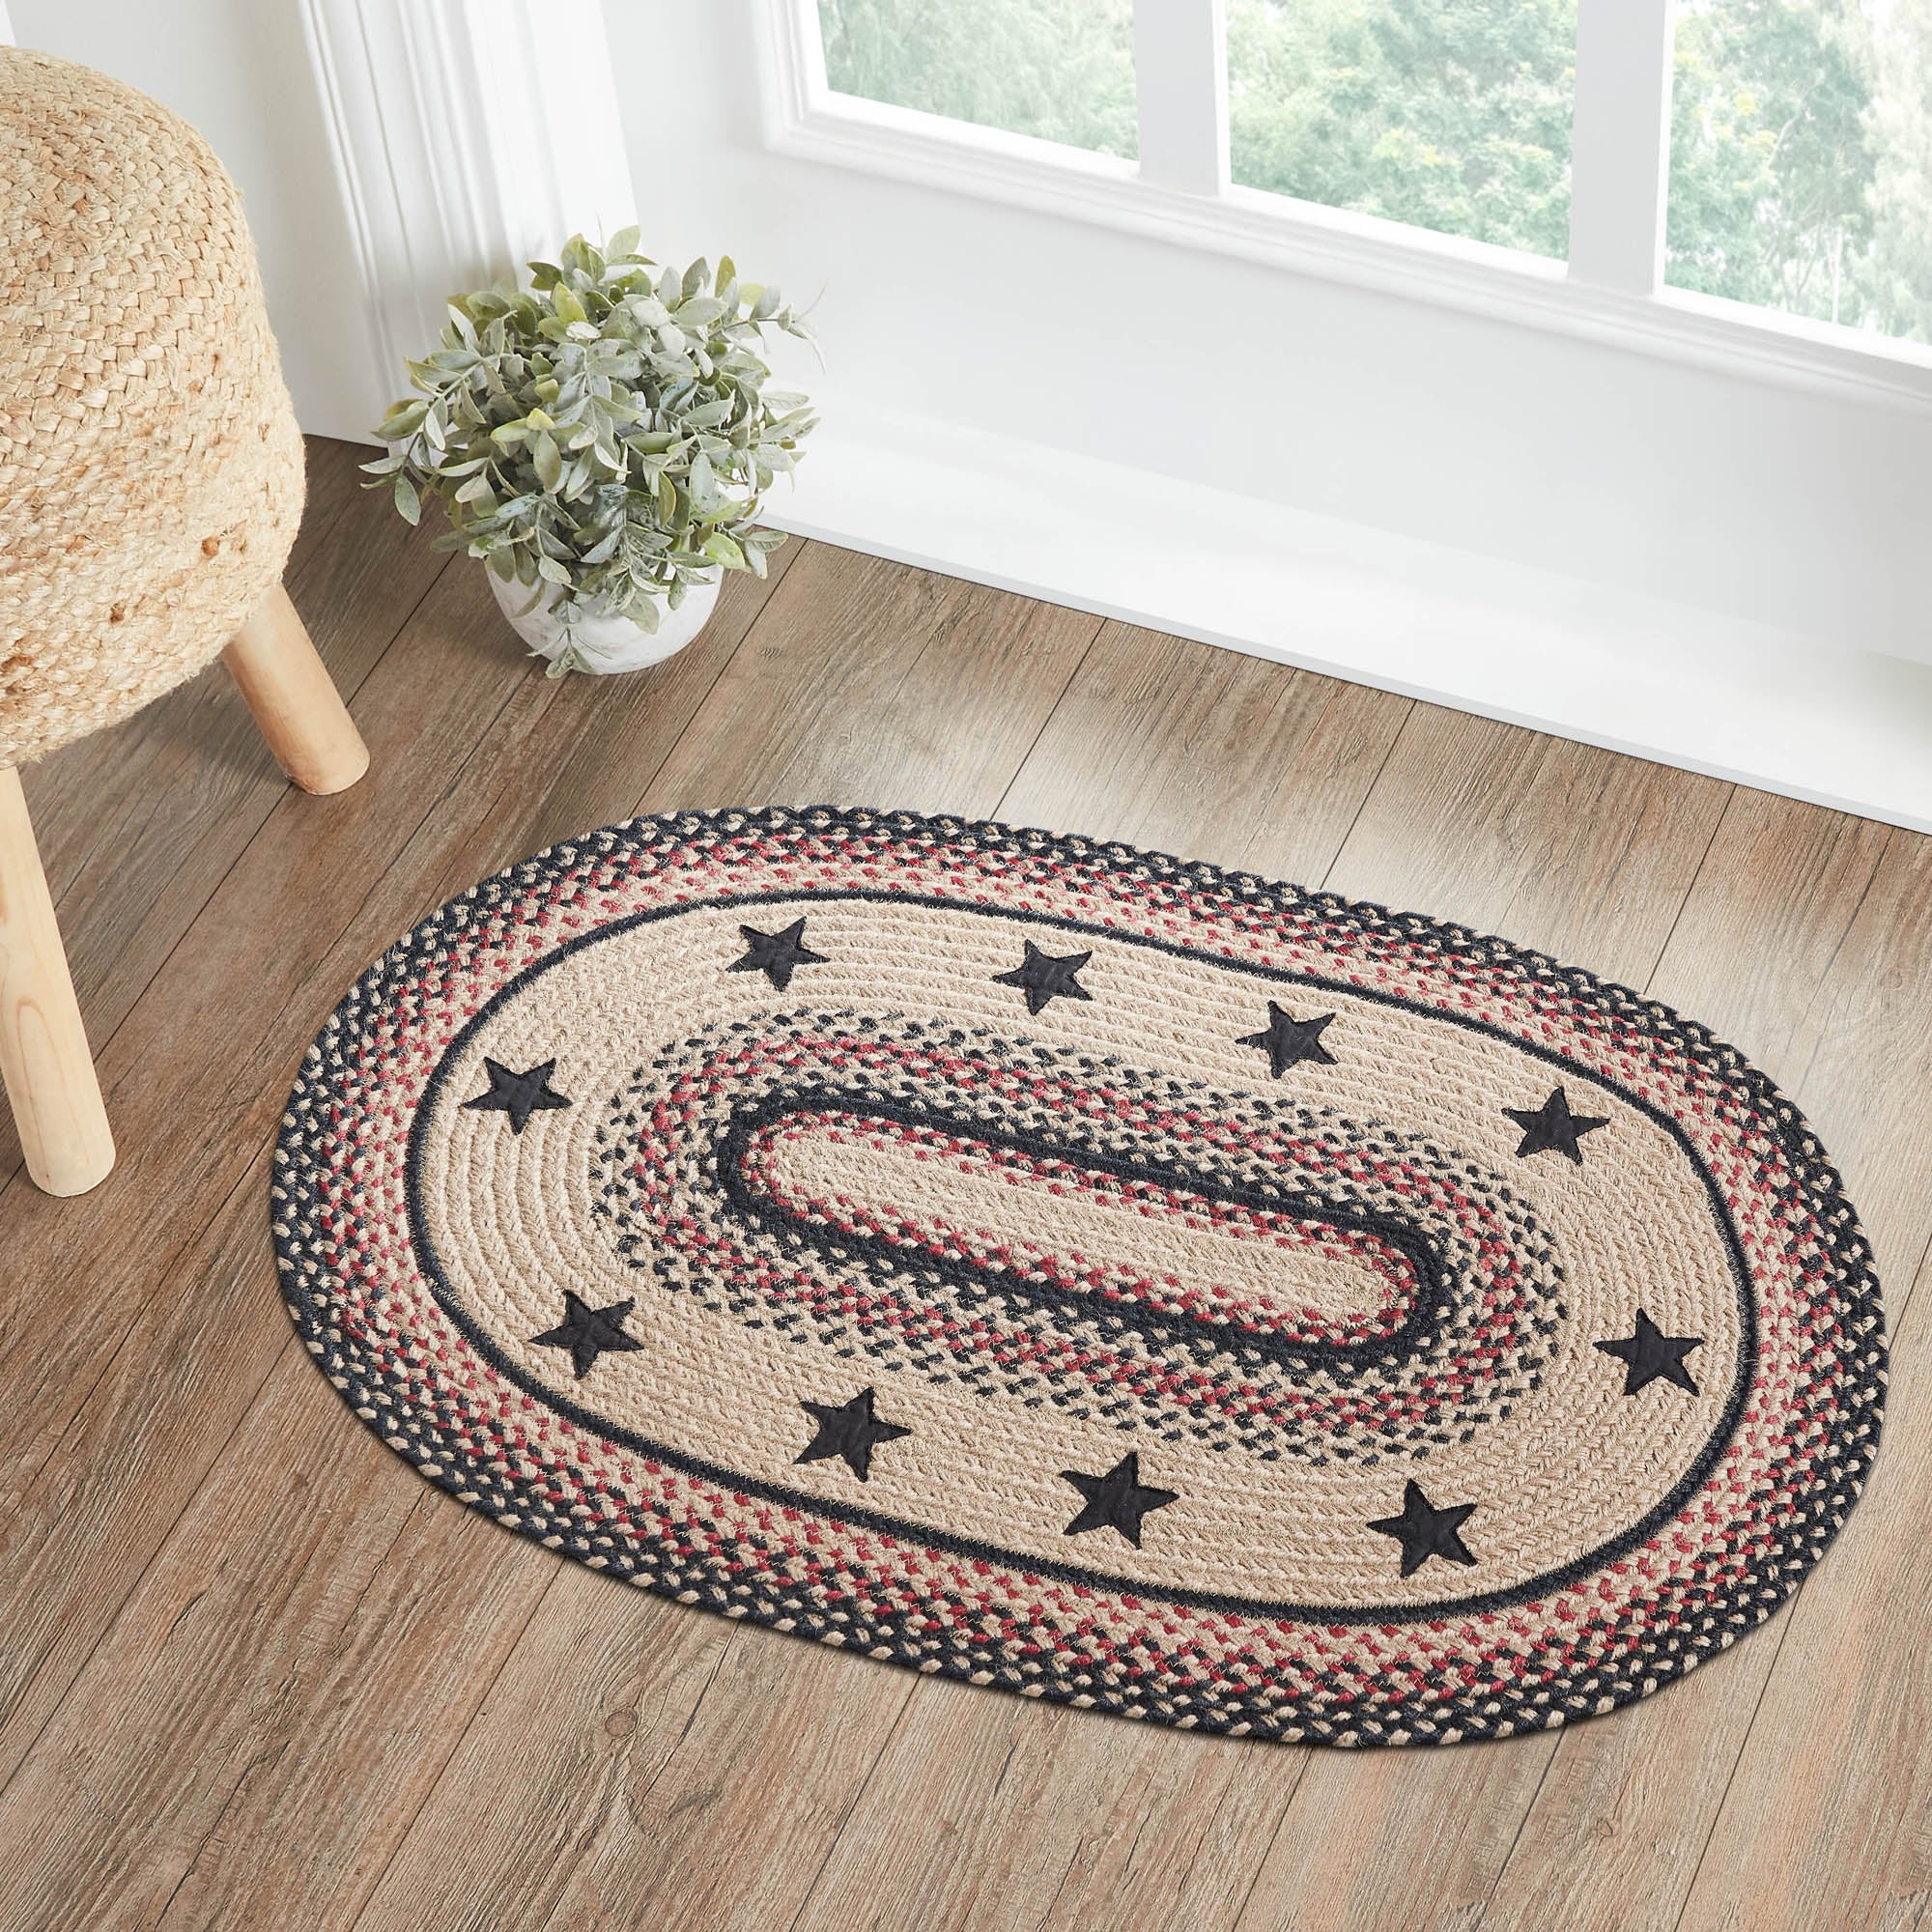 Colonial Star Oval Braided Rug 24x36 - with Pad